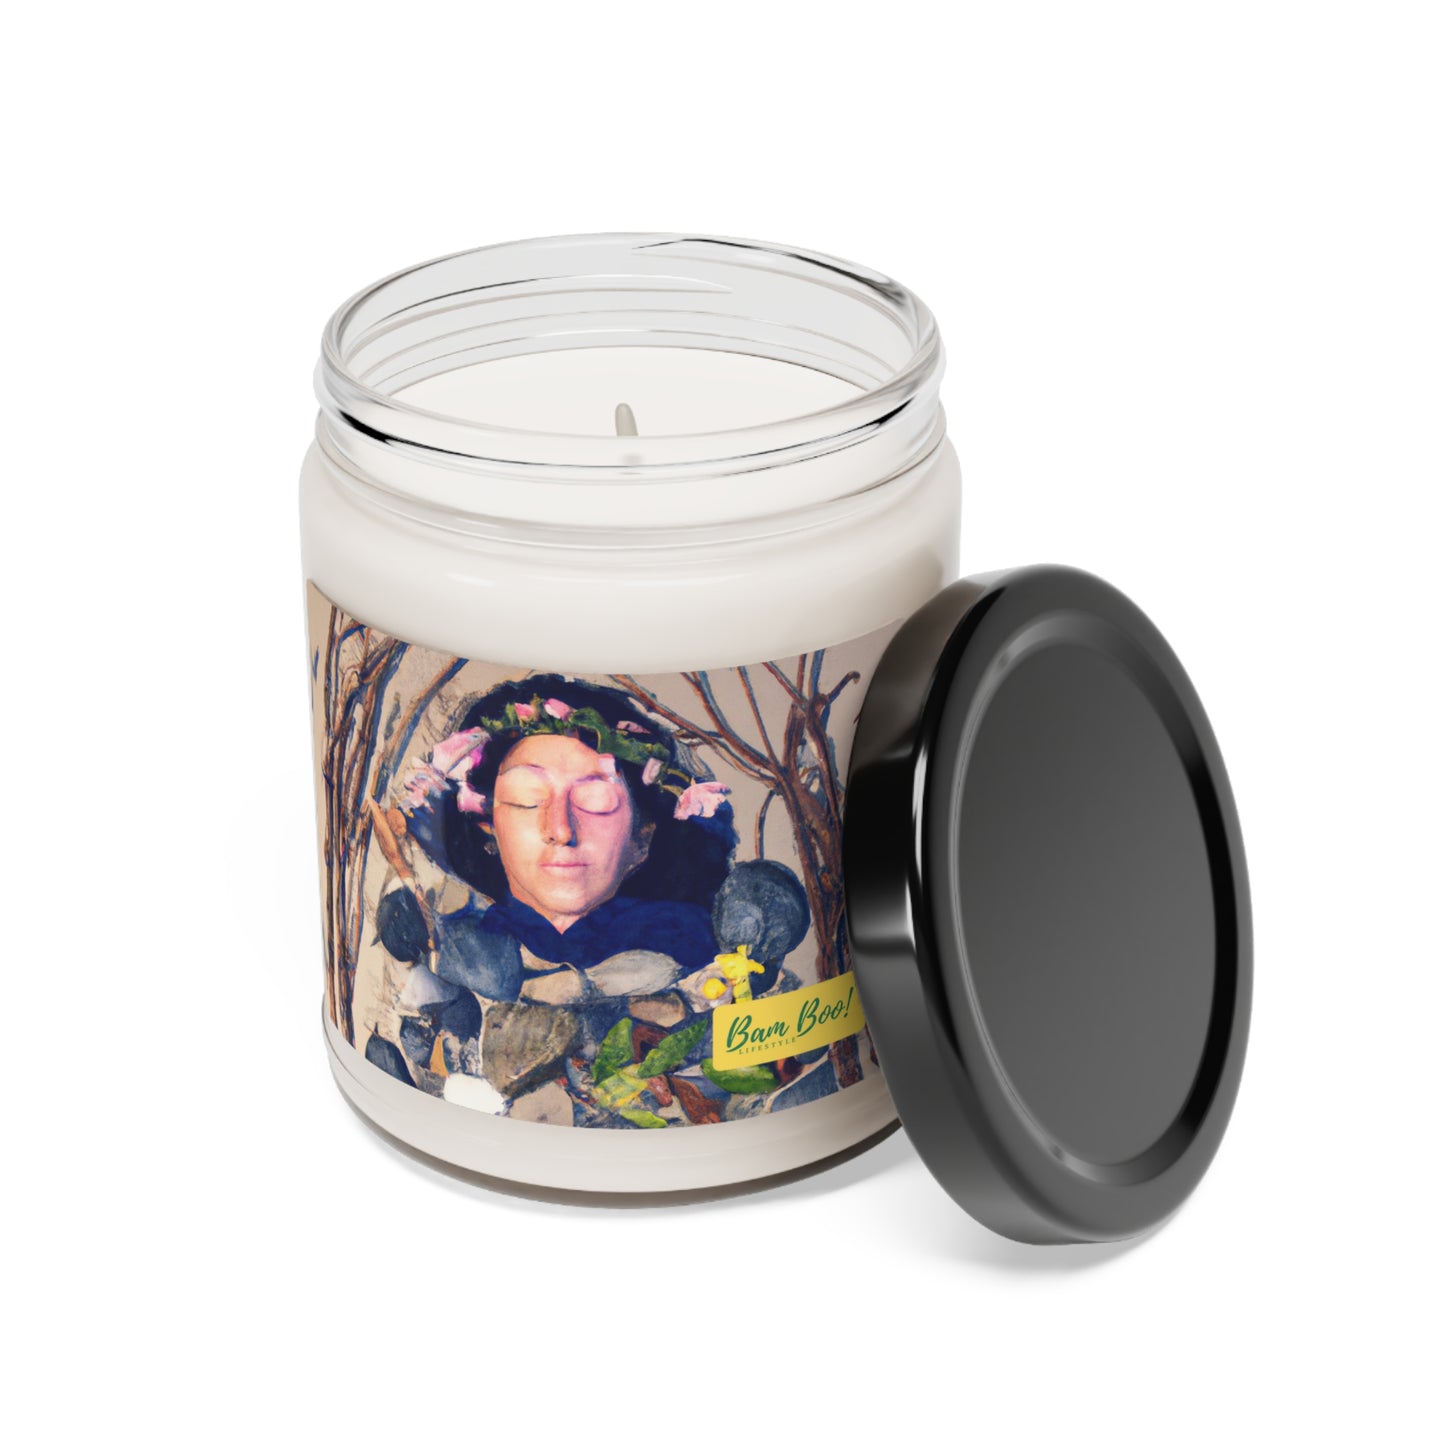 "Nature's Canvas: Crafting a Self-Portrait" - Bam Boo! Lifestyle Eco-friendly Soy Candle